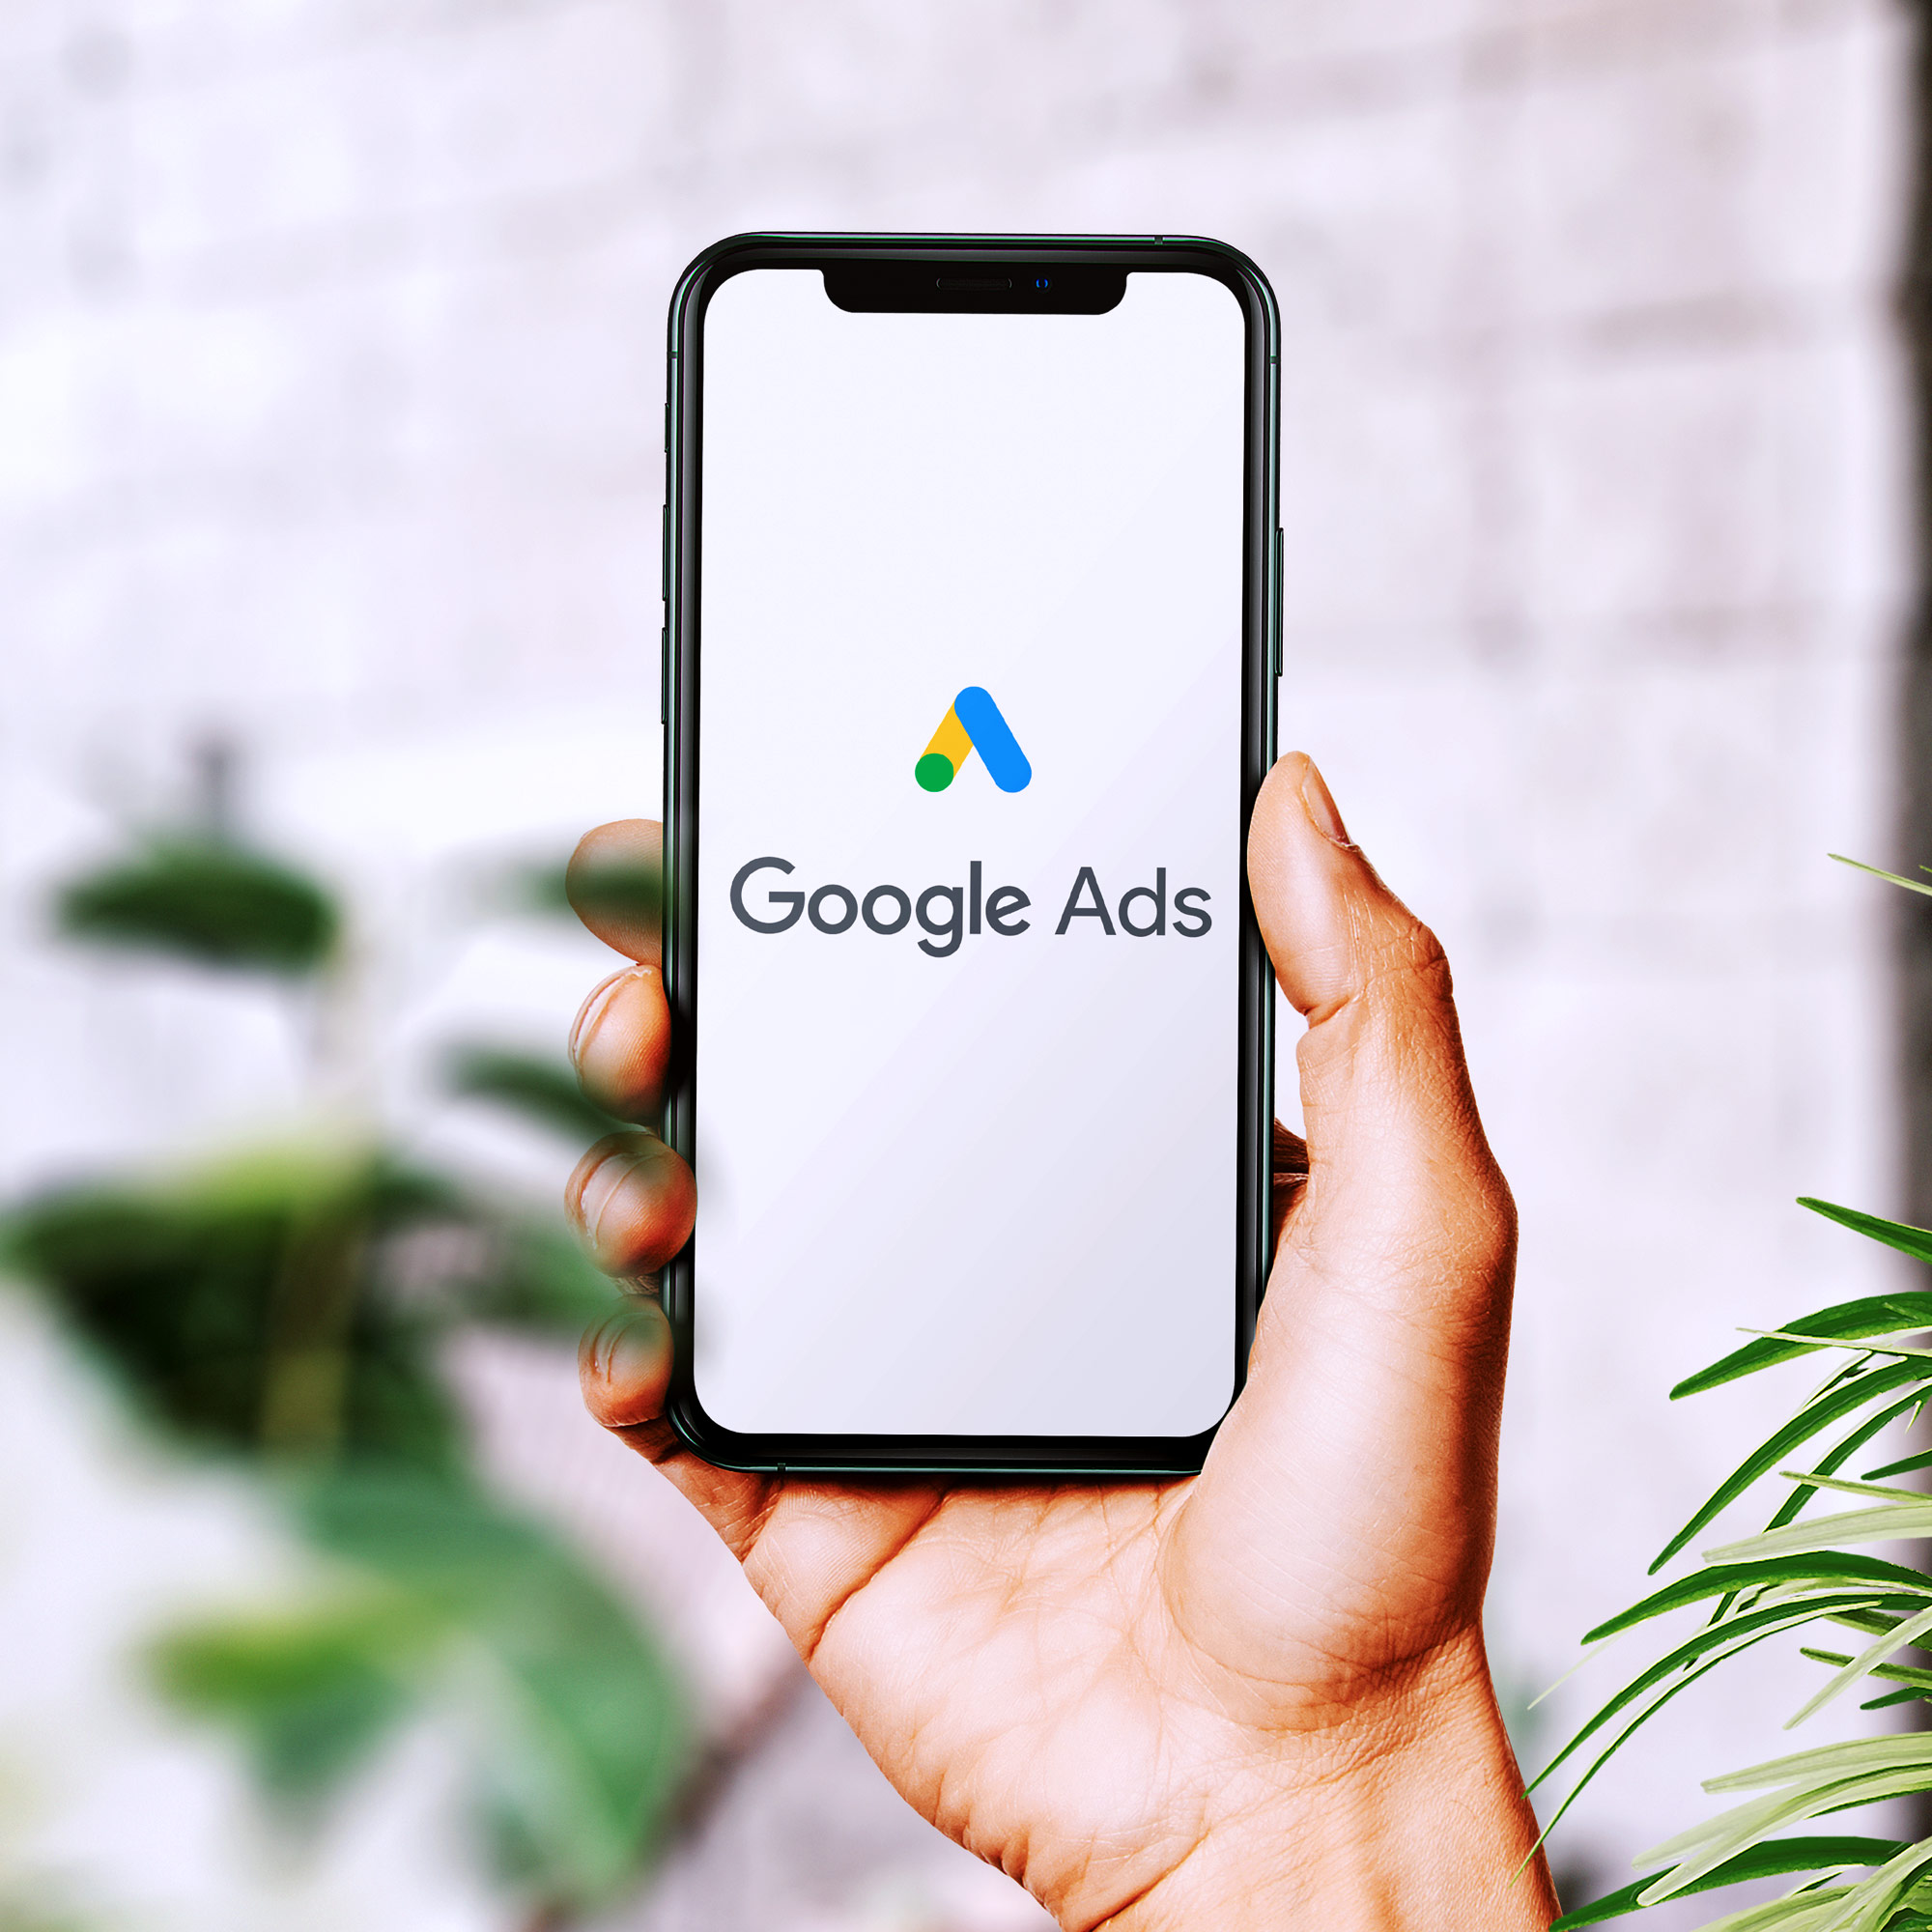 Google Ads: What It Is & How It Works